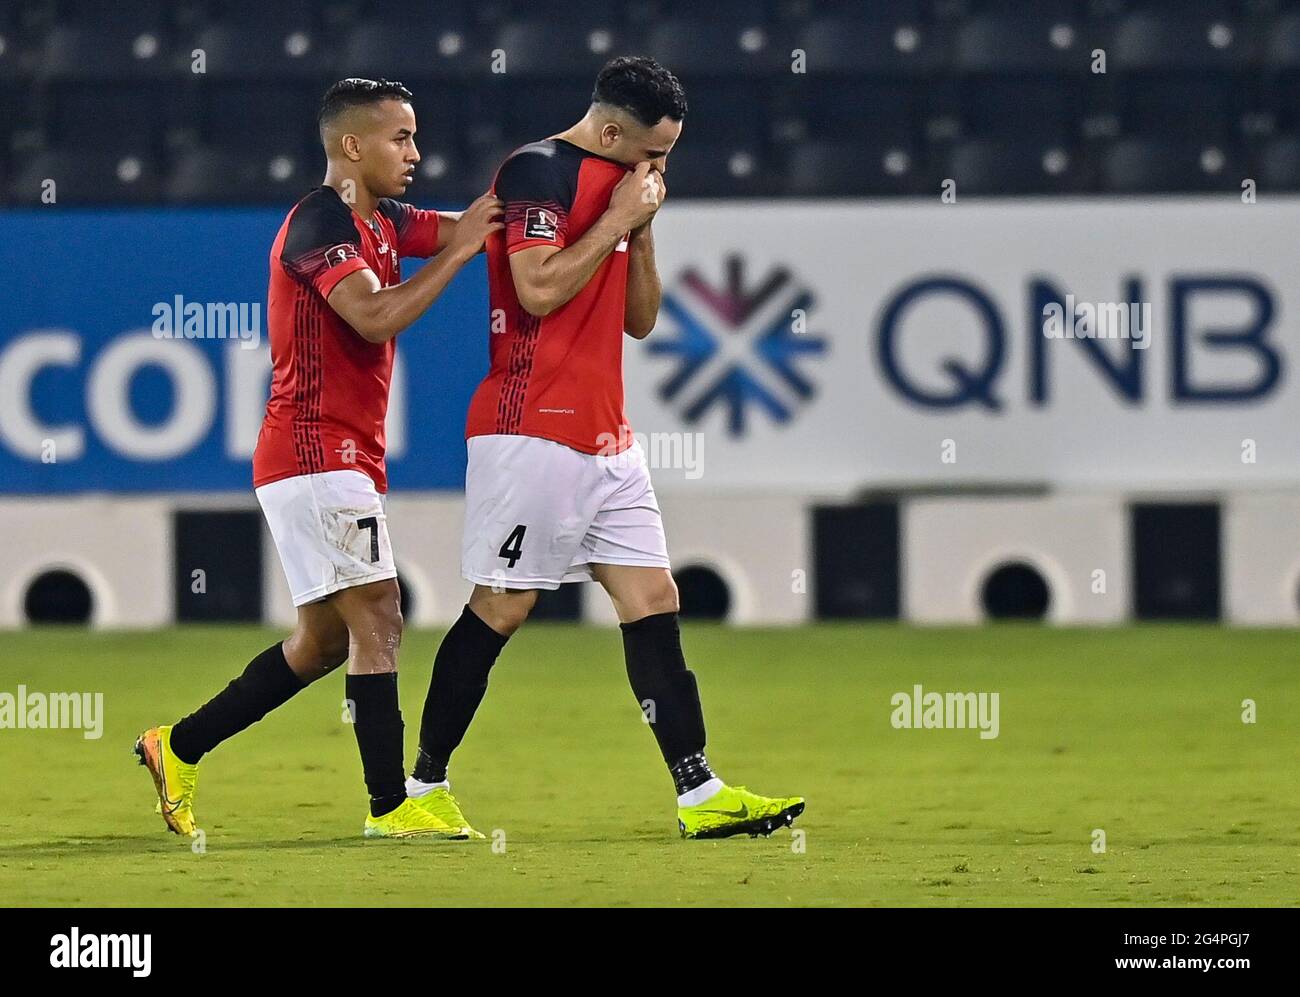 Doha, Qatar. 22nd June, 2021. Muder Al Radaei (R) of Yemen reacts as he leaves the field of play after being shown a red card during the FIFA Arab Cup Qatar 2021 qualifying round football match between Mauritania and Yemen in Doha, Qatar, June 22, 2021. Credit: Nikku/Xinhua/Alamy Live News Stock Photo